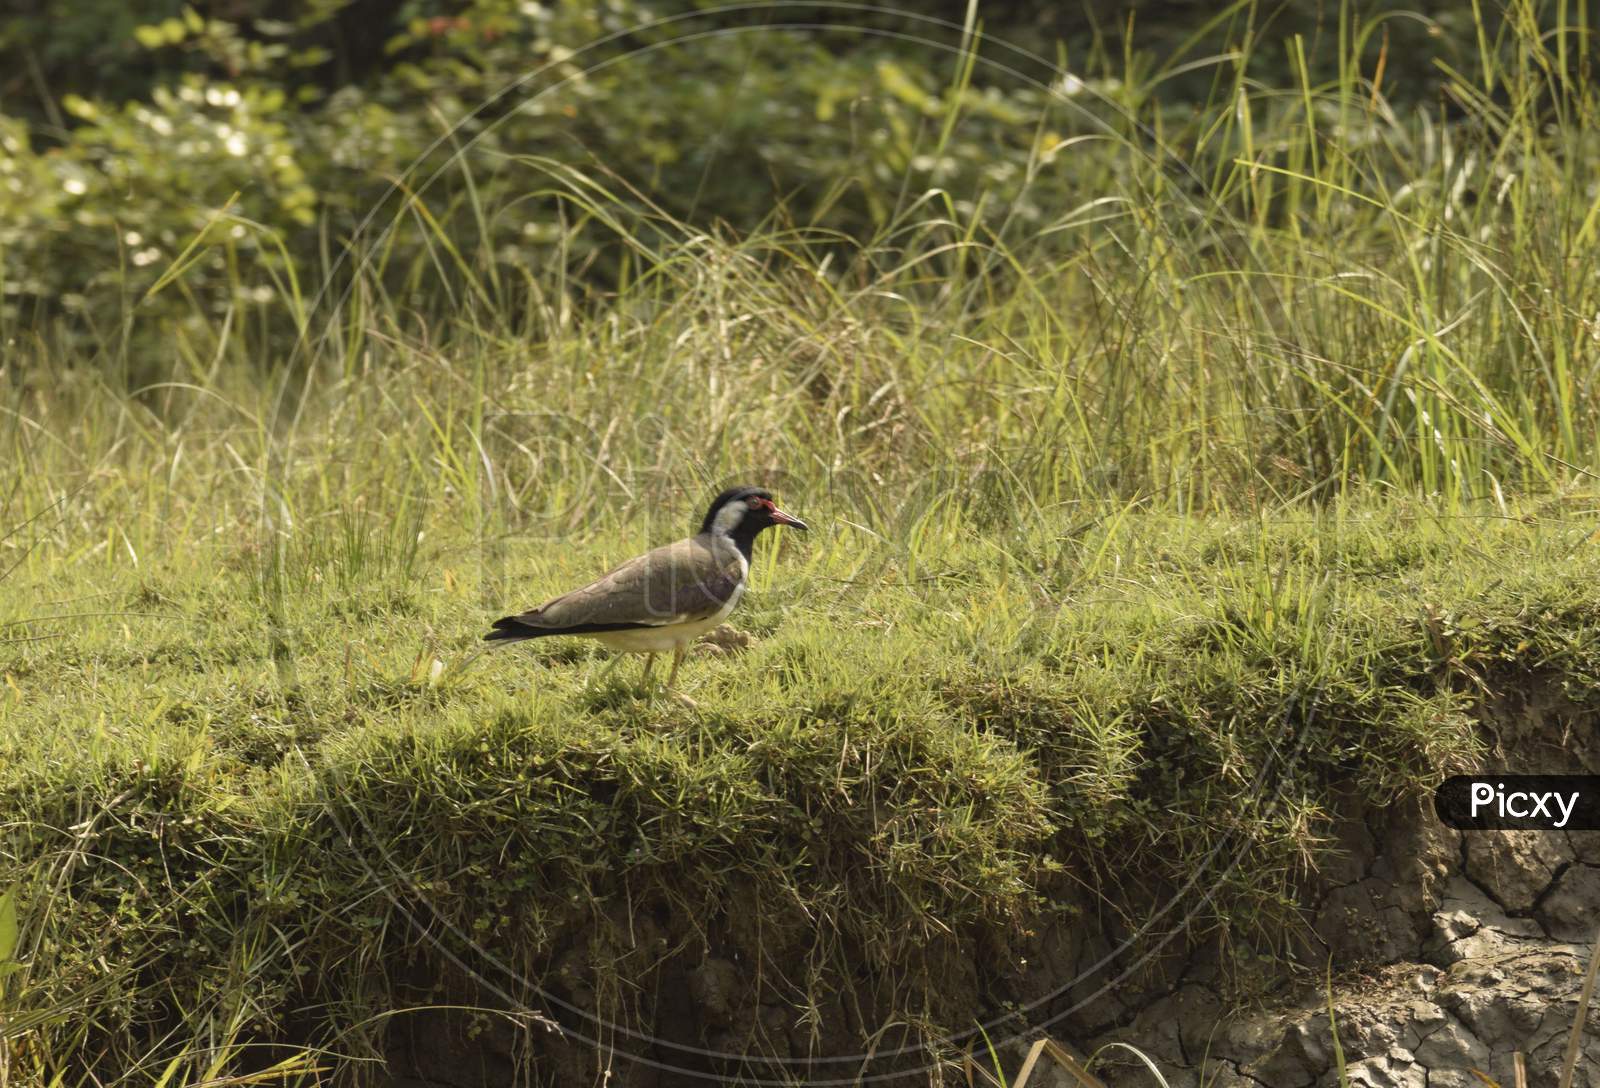 The red-wattled lapwing